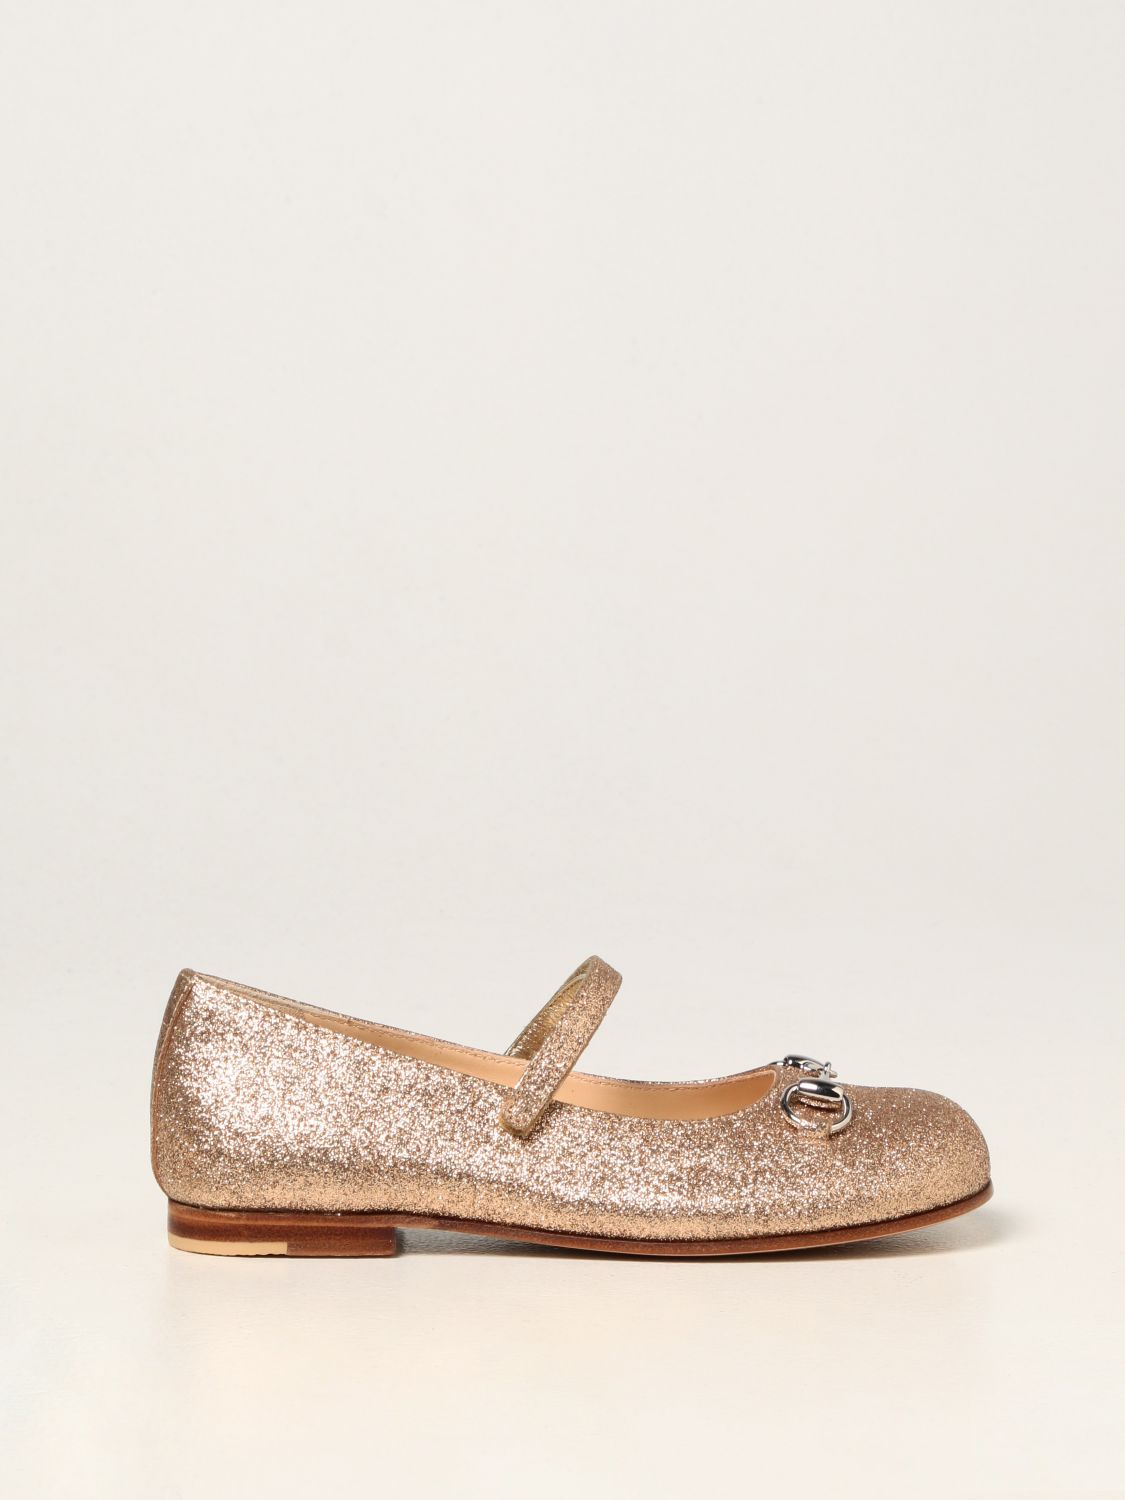 Shoes Gucci: Gucci ballet flats in glitter fabric sand 1